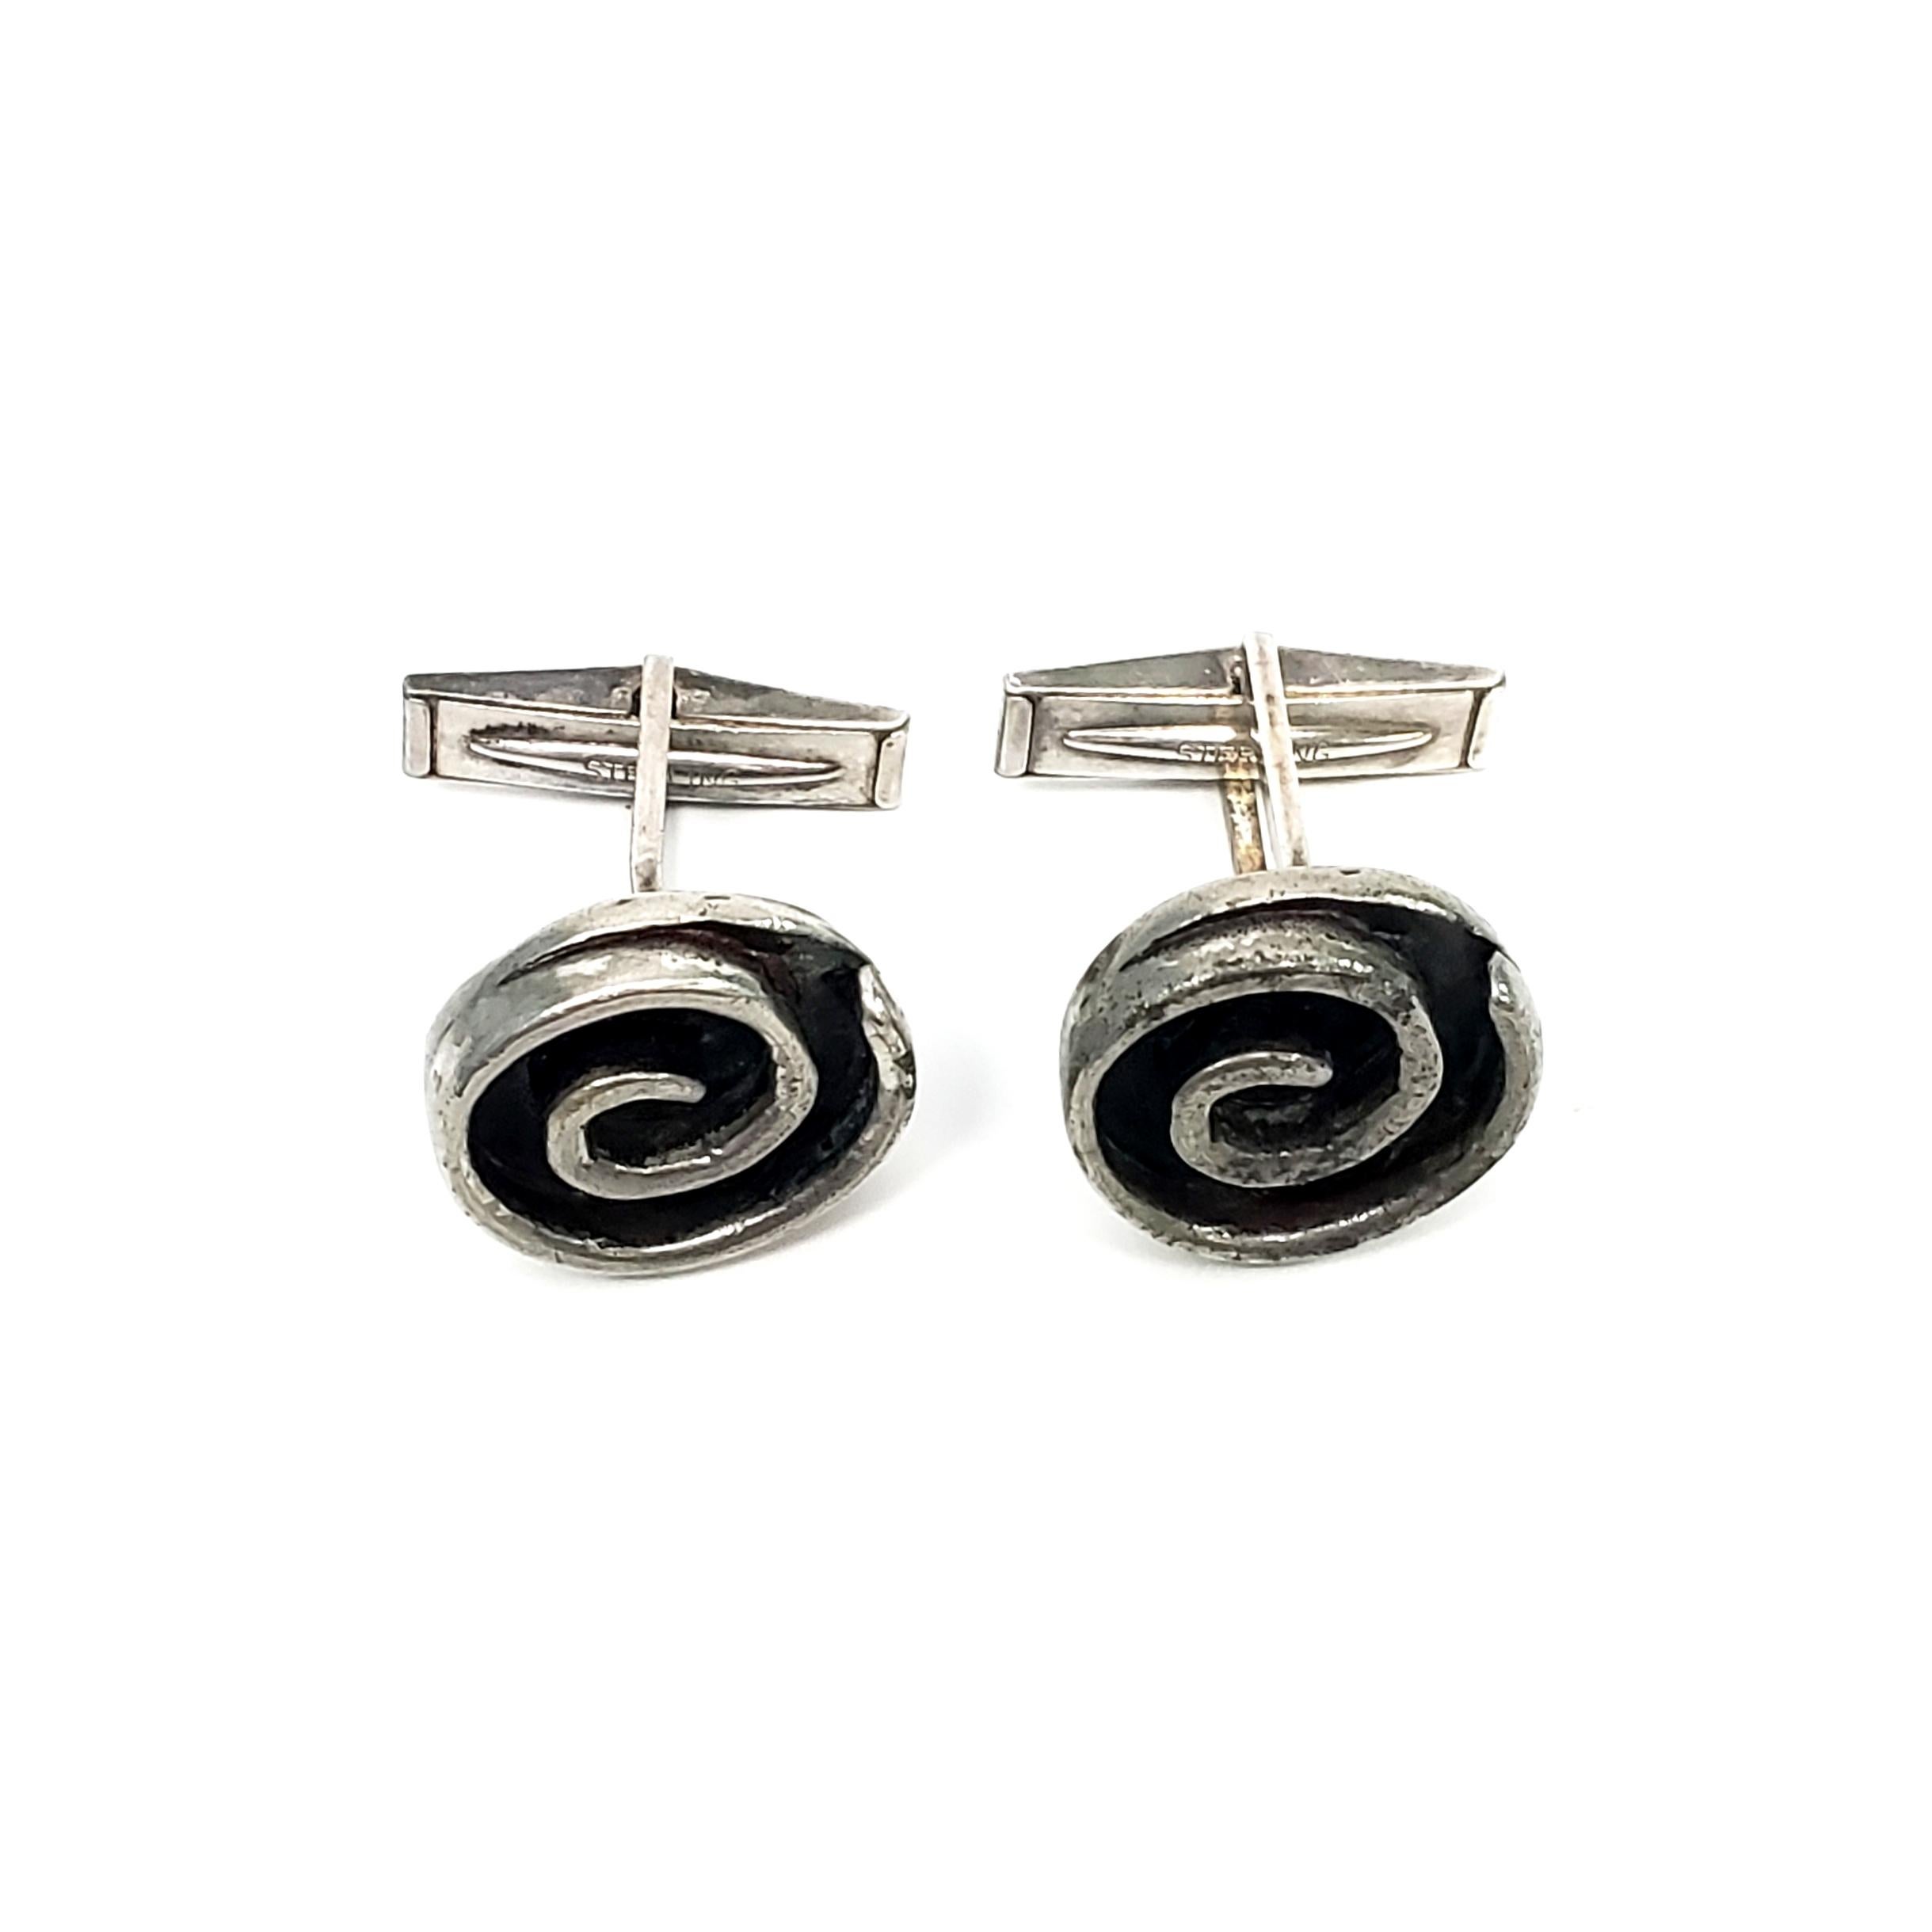 Winifred Mason Chenet sterling silver swirl cuff links.

Winifred Mason Chenet was a NYC jewelry designer in the 1940s, making one-of-a-kind pieces for celebrities such as Billie Holiday, and high end retailers.  These cuff links feature an oxidized